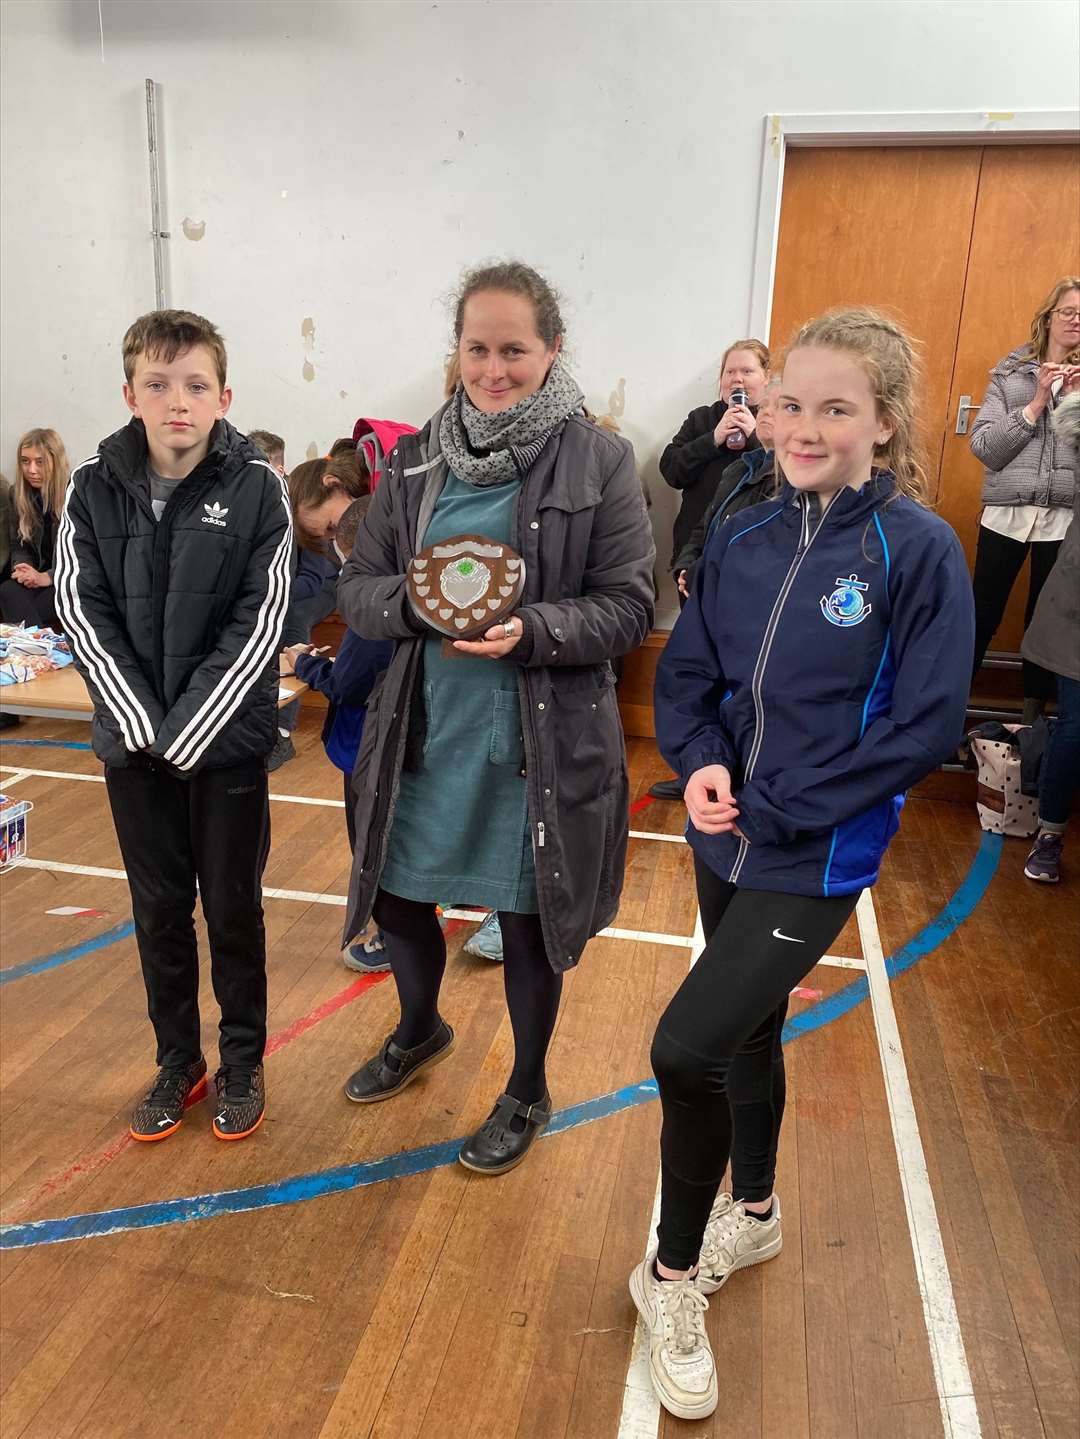 North Coast Campus head teacher Katherine Wood presents Keiran Donner and Zara MacKintosh, flag bearers for winning team the Stags, with the shield.